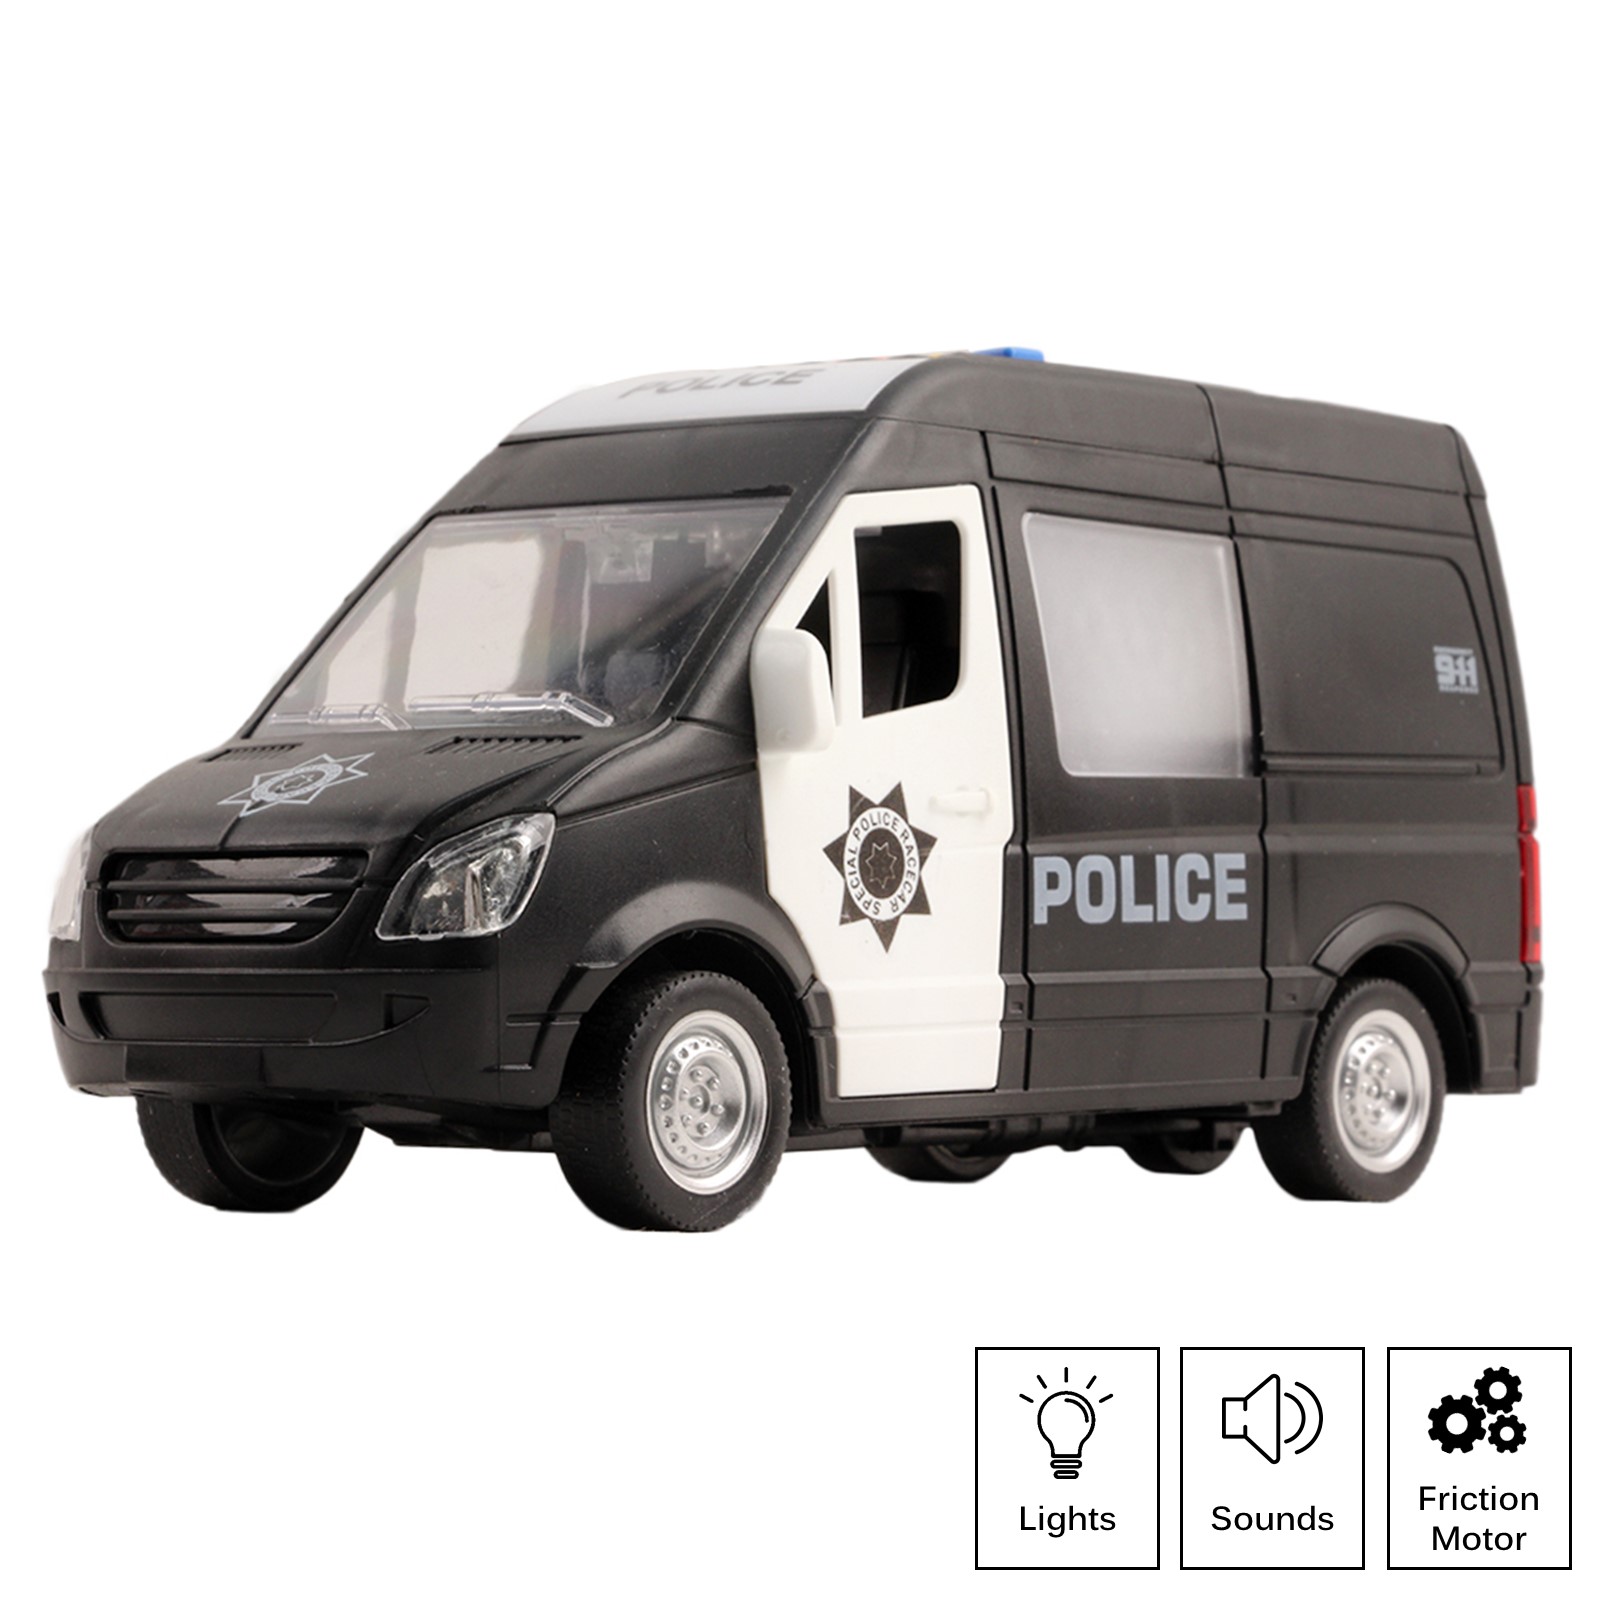 Rescue Police Car Friction Powered 1:16 Scale With Lights And Sound Effects Durable Kids SWAT Transport Vehicle Push And Go Pretend Play Emergency Toy Cop Van Great Gift For Children Boys Girls